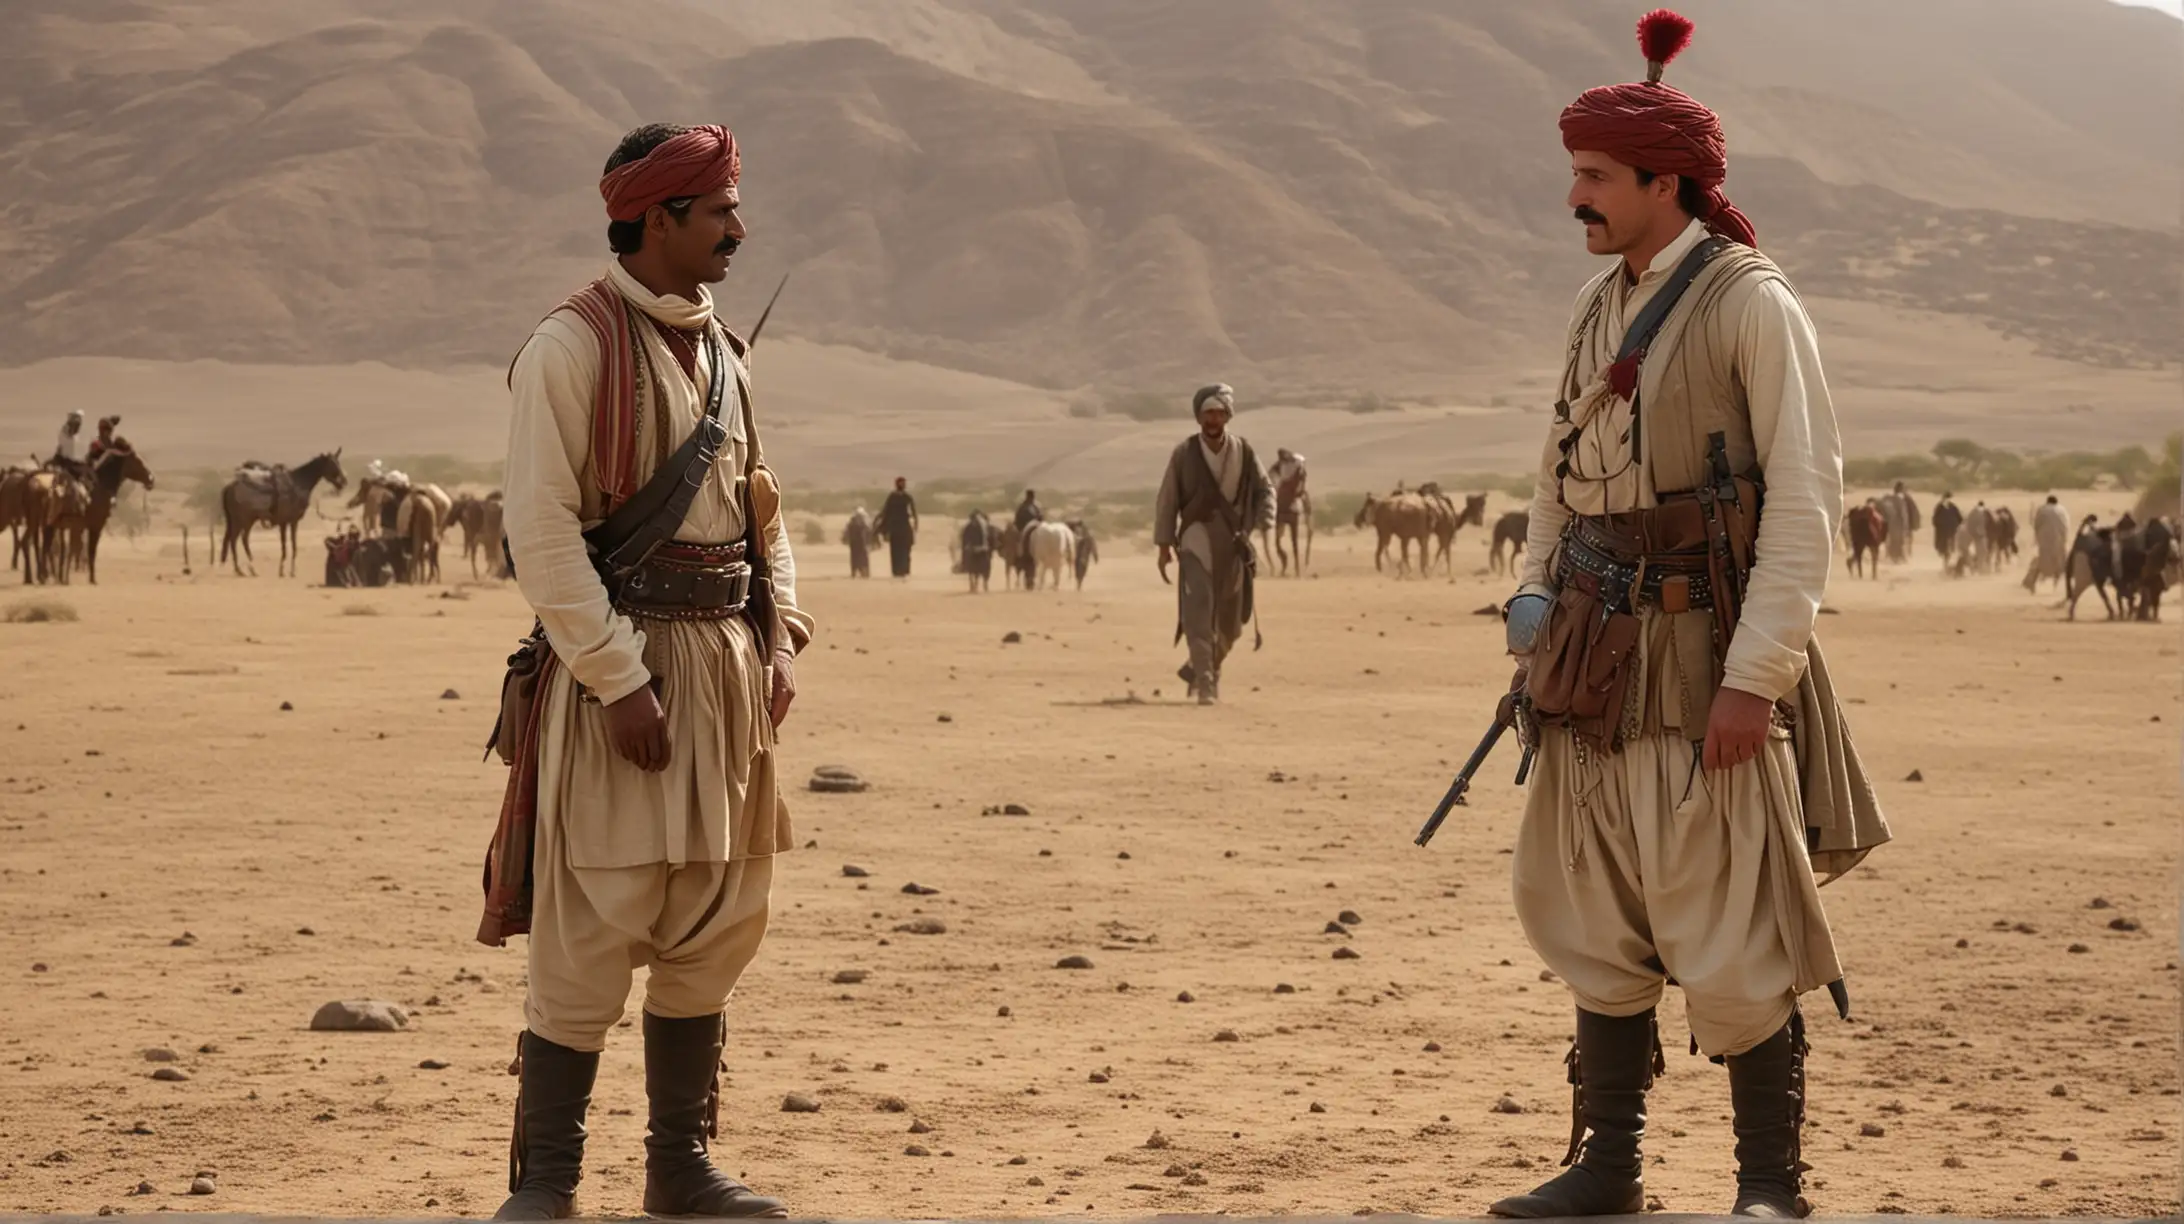 19th century colonial Britisher Imperial English-Governor is negotiating with a tribal Baloch man. Cinematic